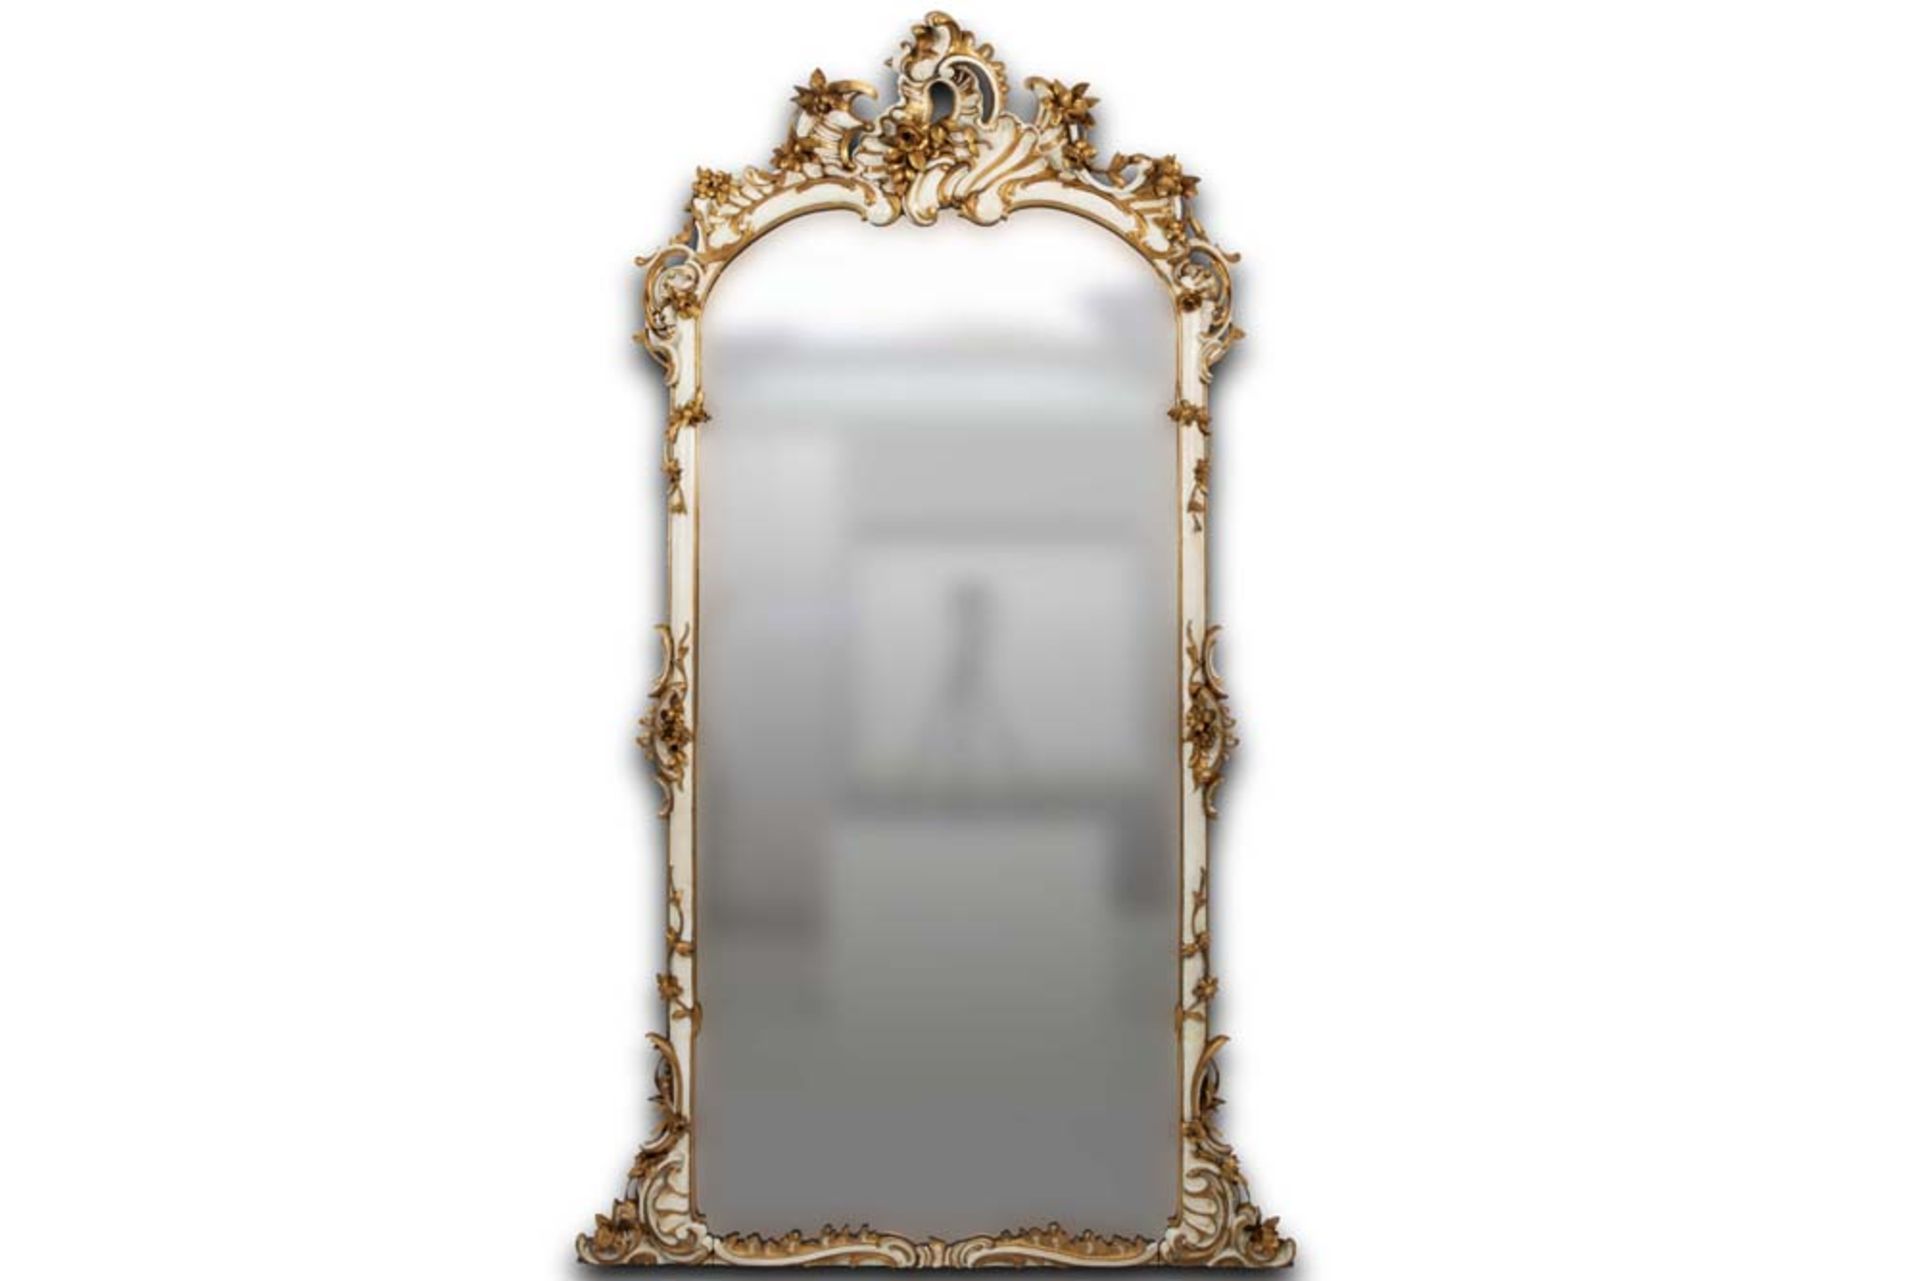 19th Cent. mirror with a Louis XV style frame in polychromed and sculpted wood || Negentiende eeuwse